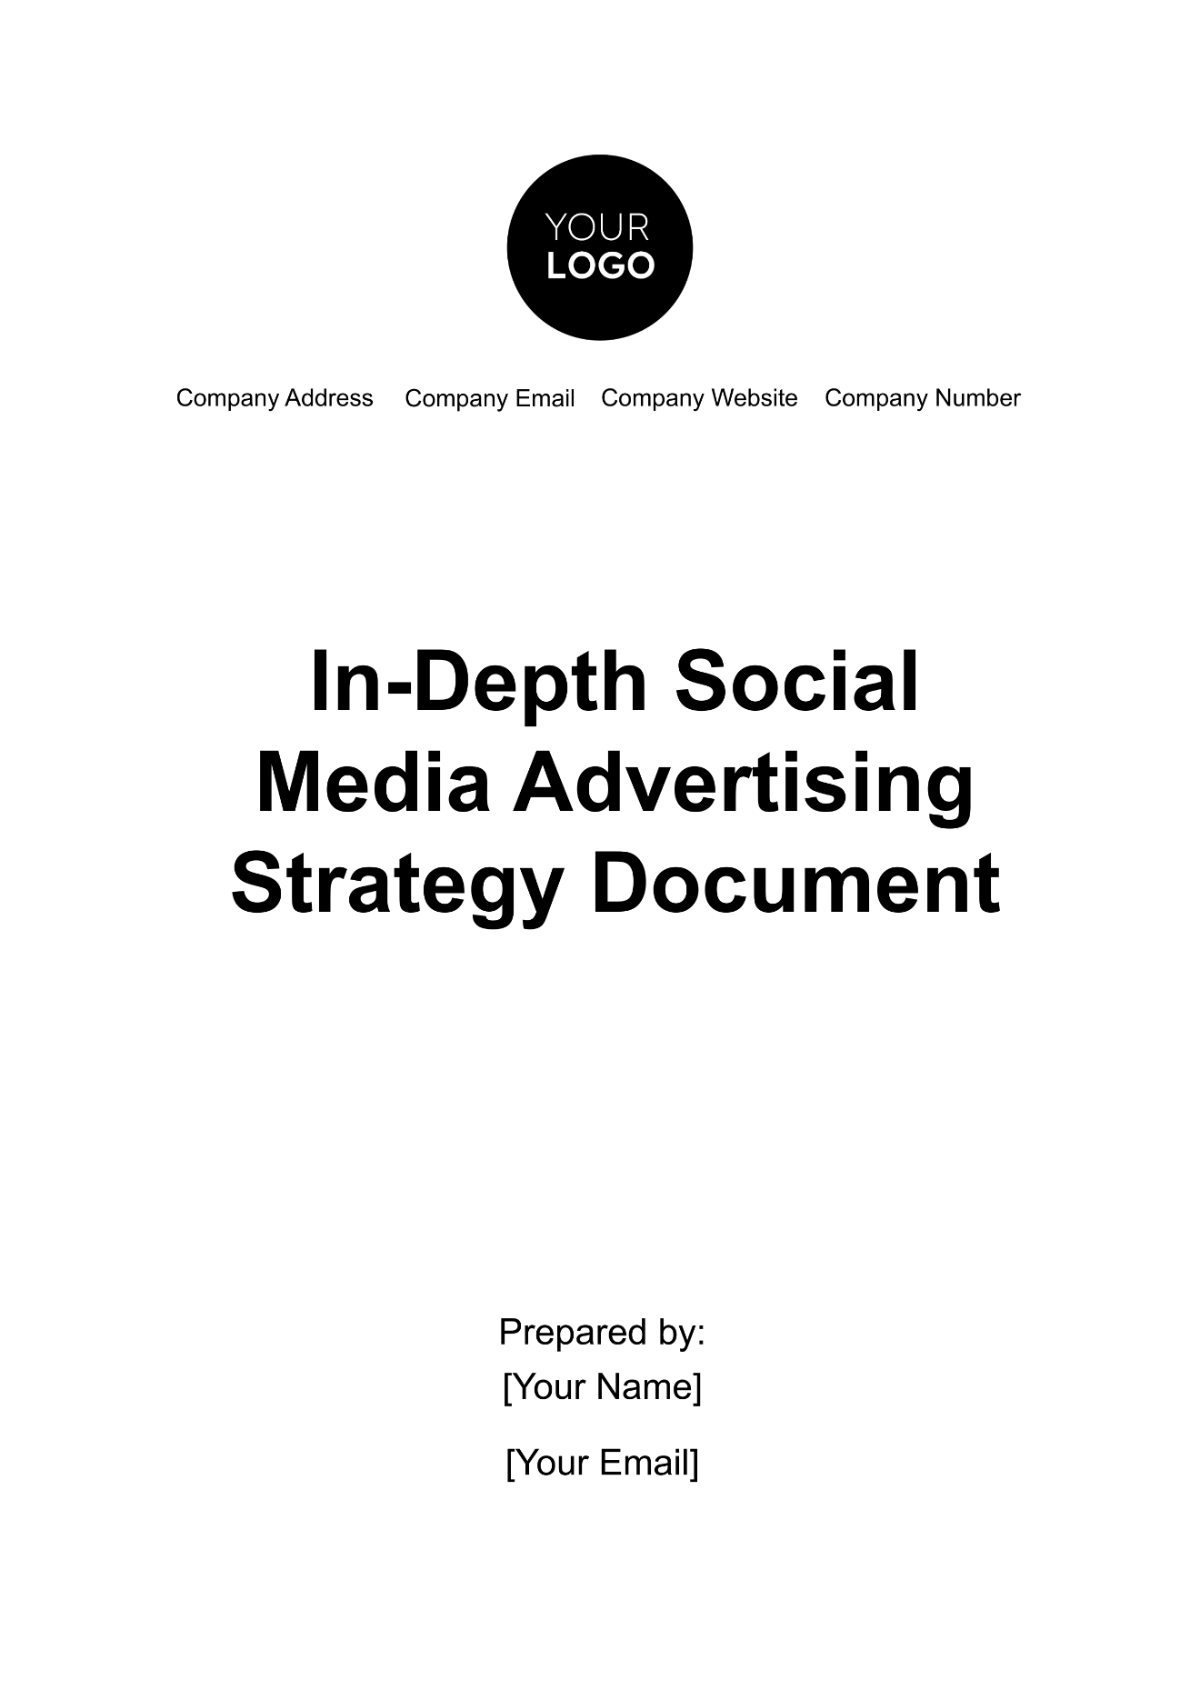 In-Depth Social Media Advertising Strategy Document Template